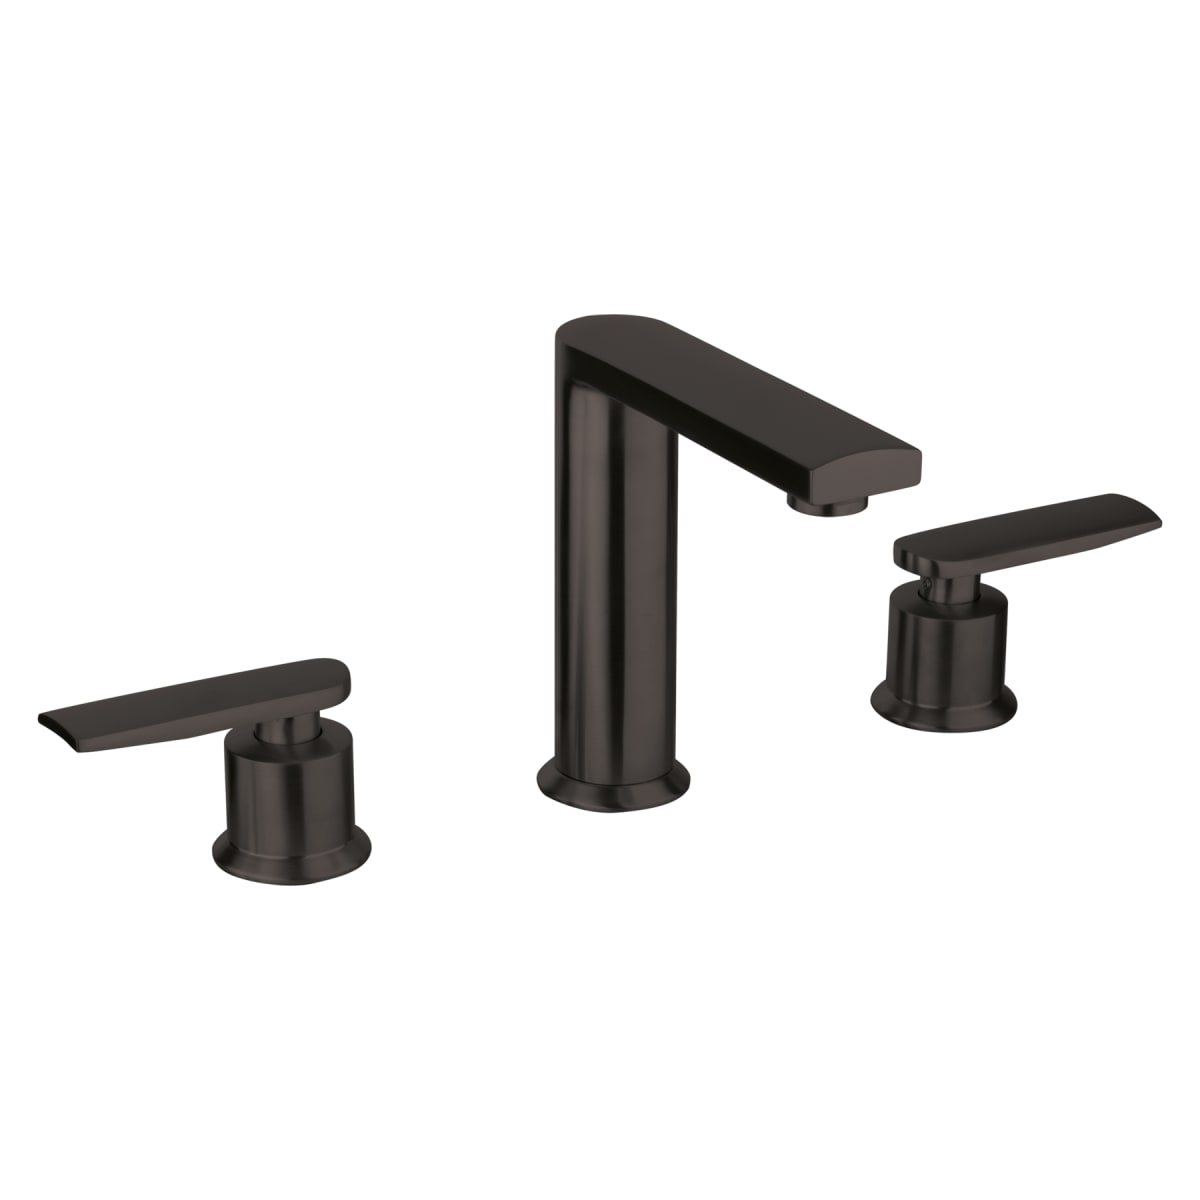 FORTIS Widespread Faucet Fortis 8821 40CBN L2 